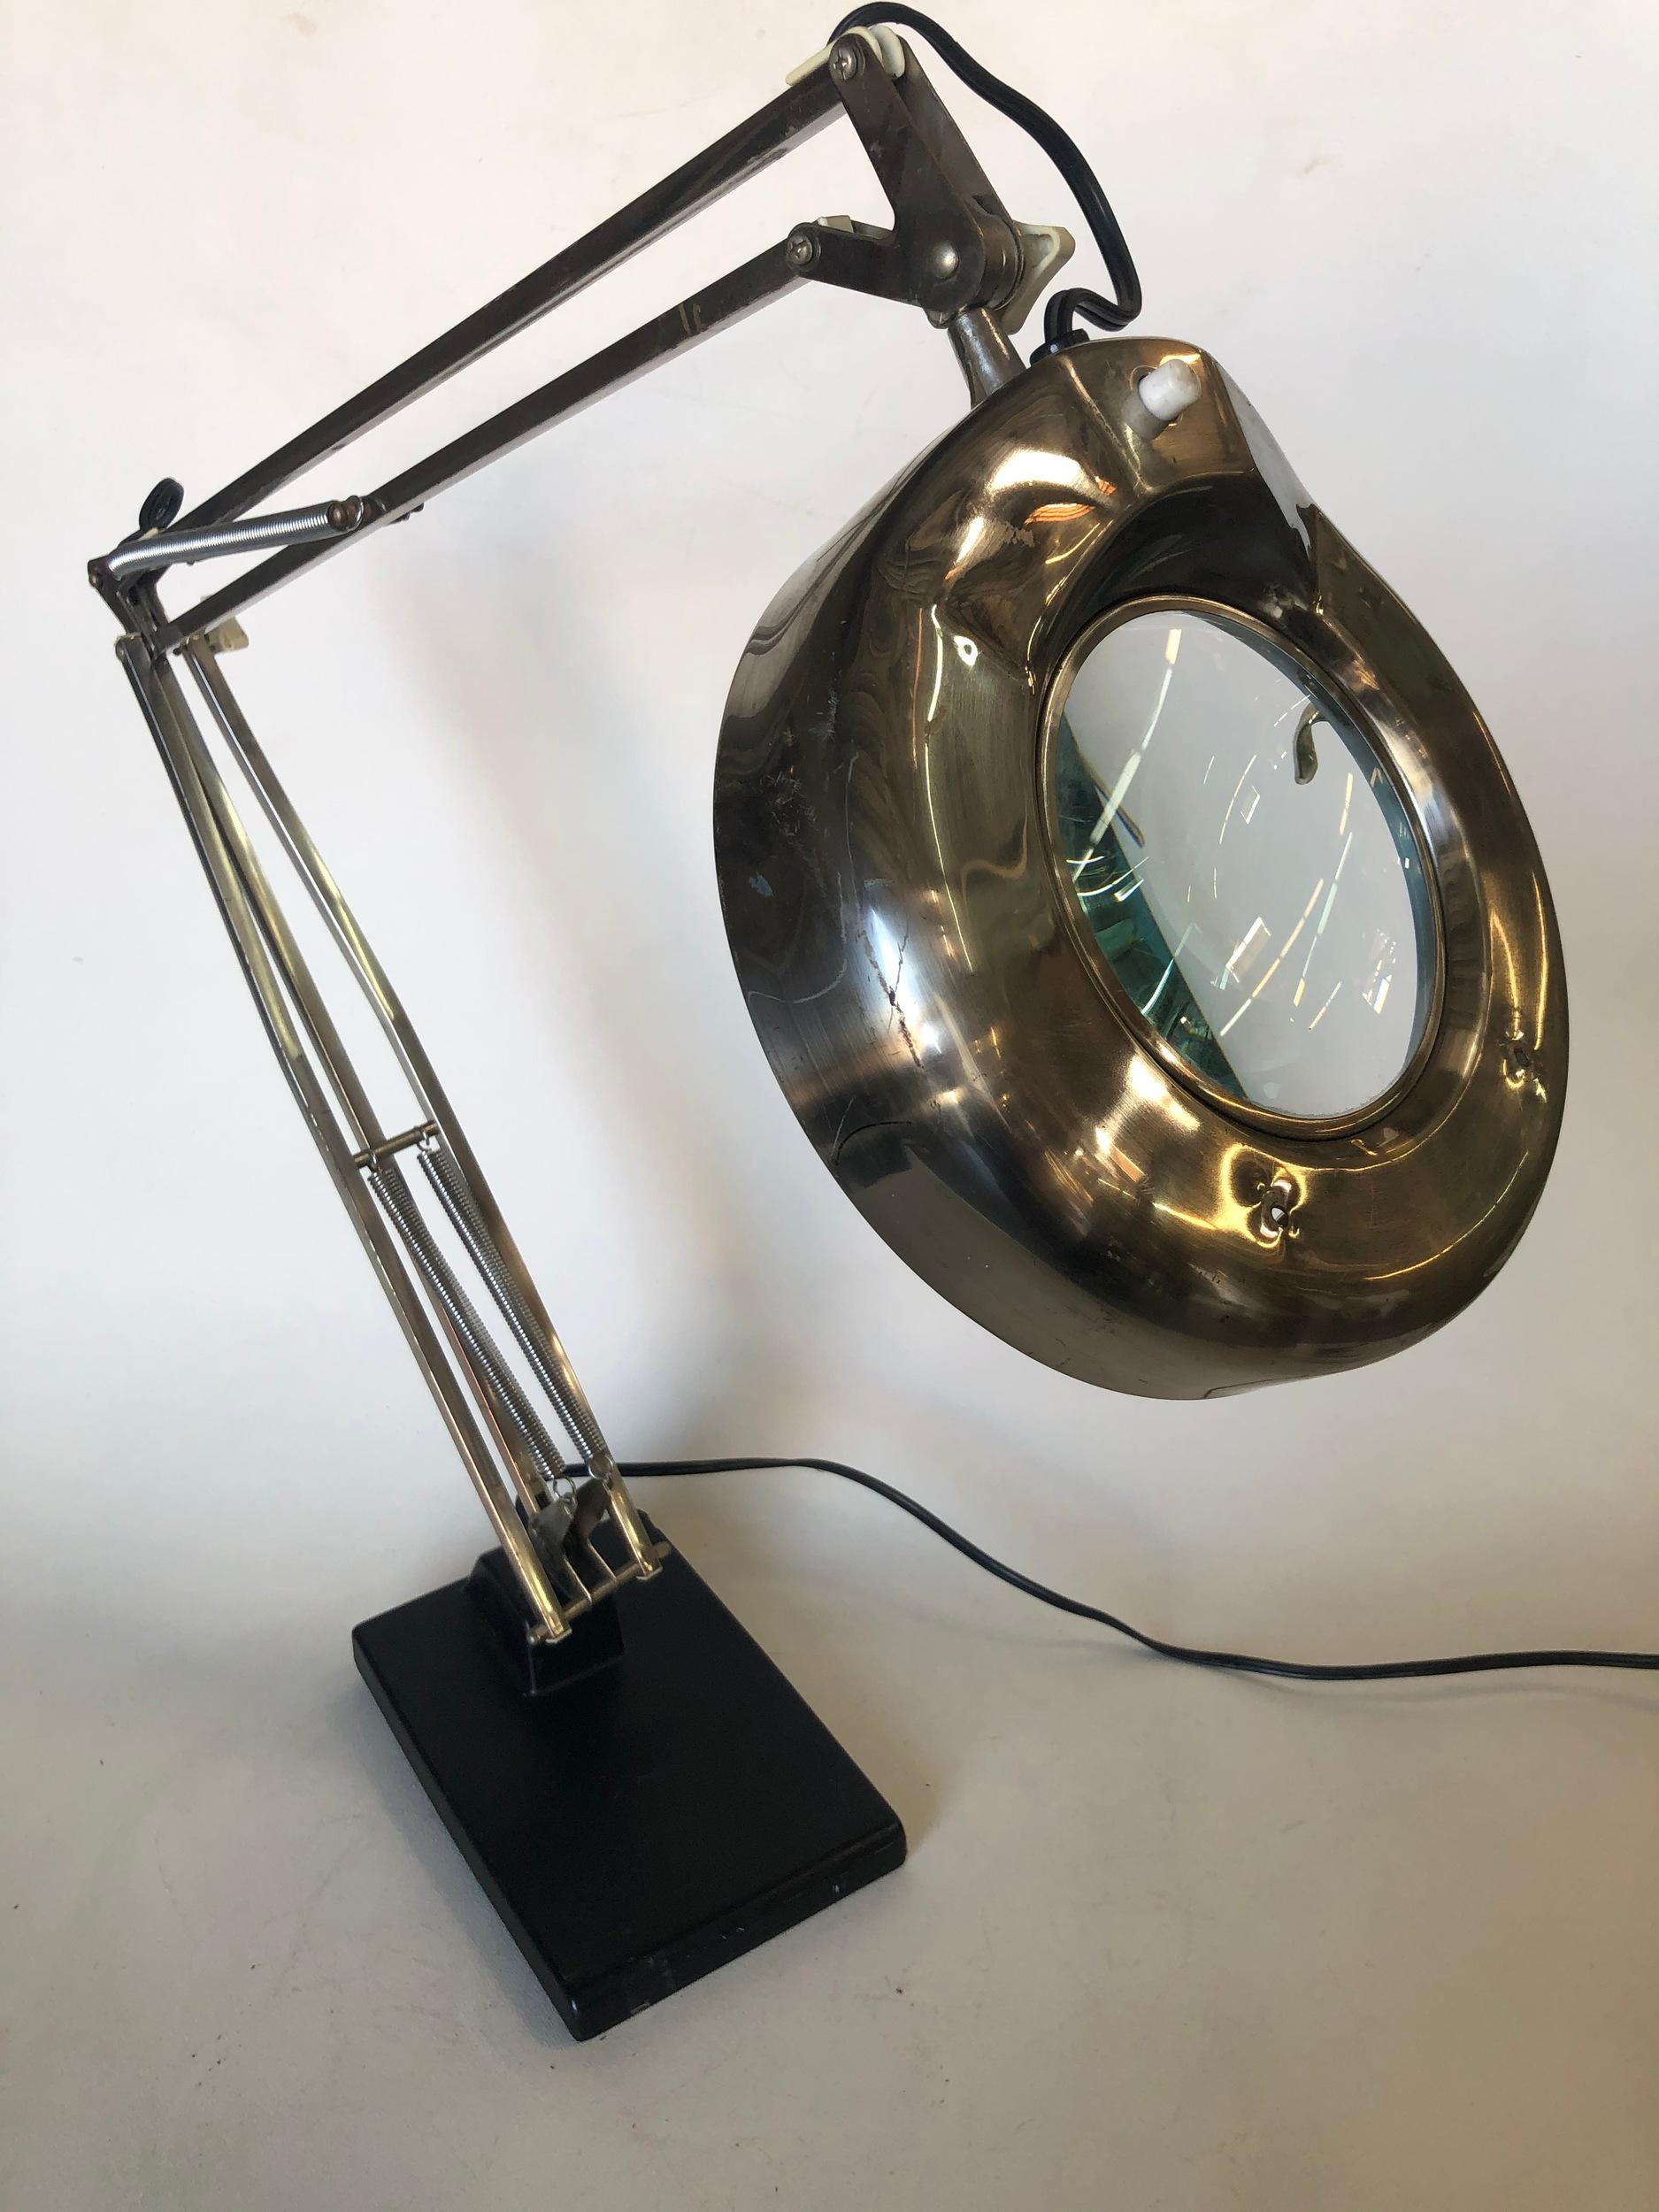 Vintage articulating floating fixture magnifying dazor desk lamp with weighted base.

Takes 22 Watt circular bulb. 

Measures 30